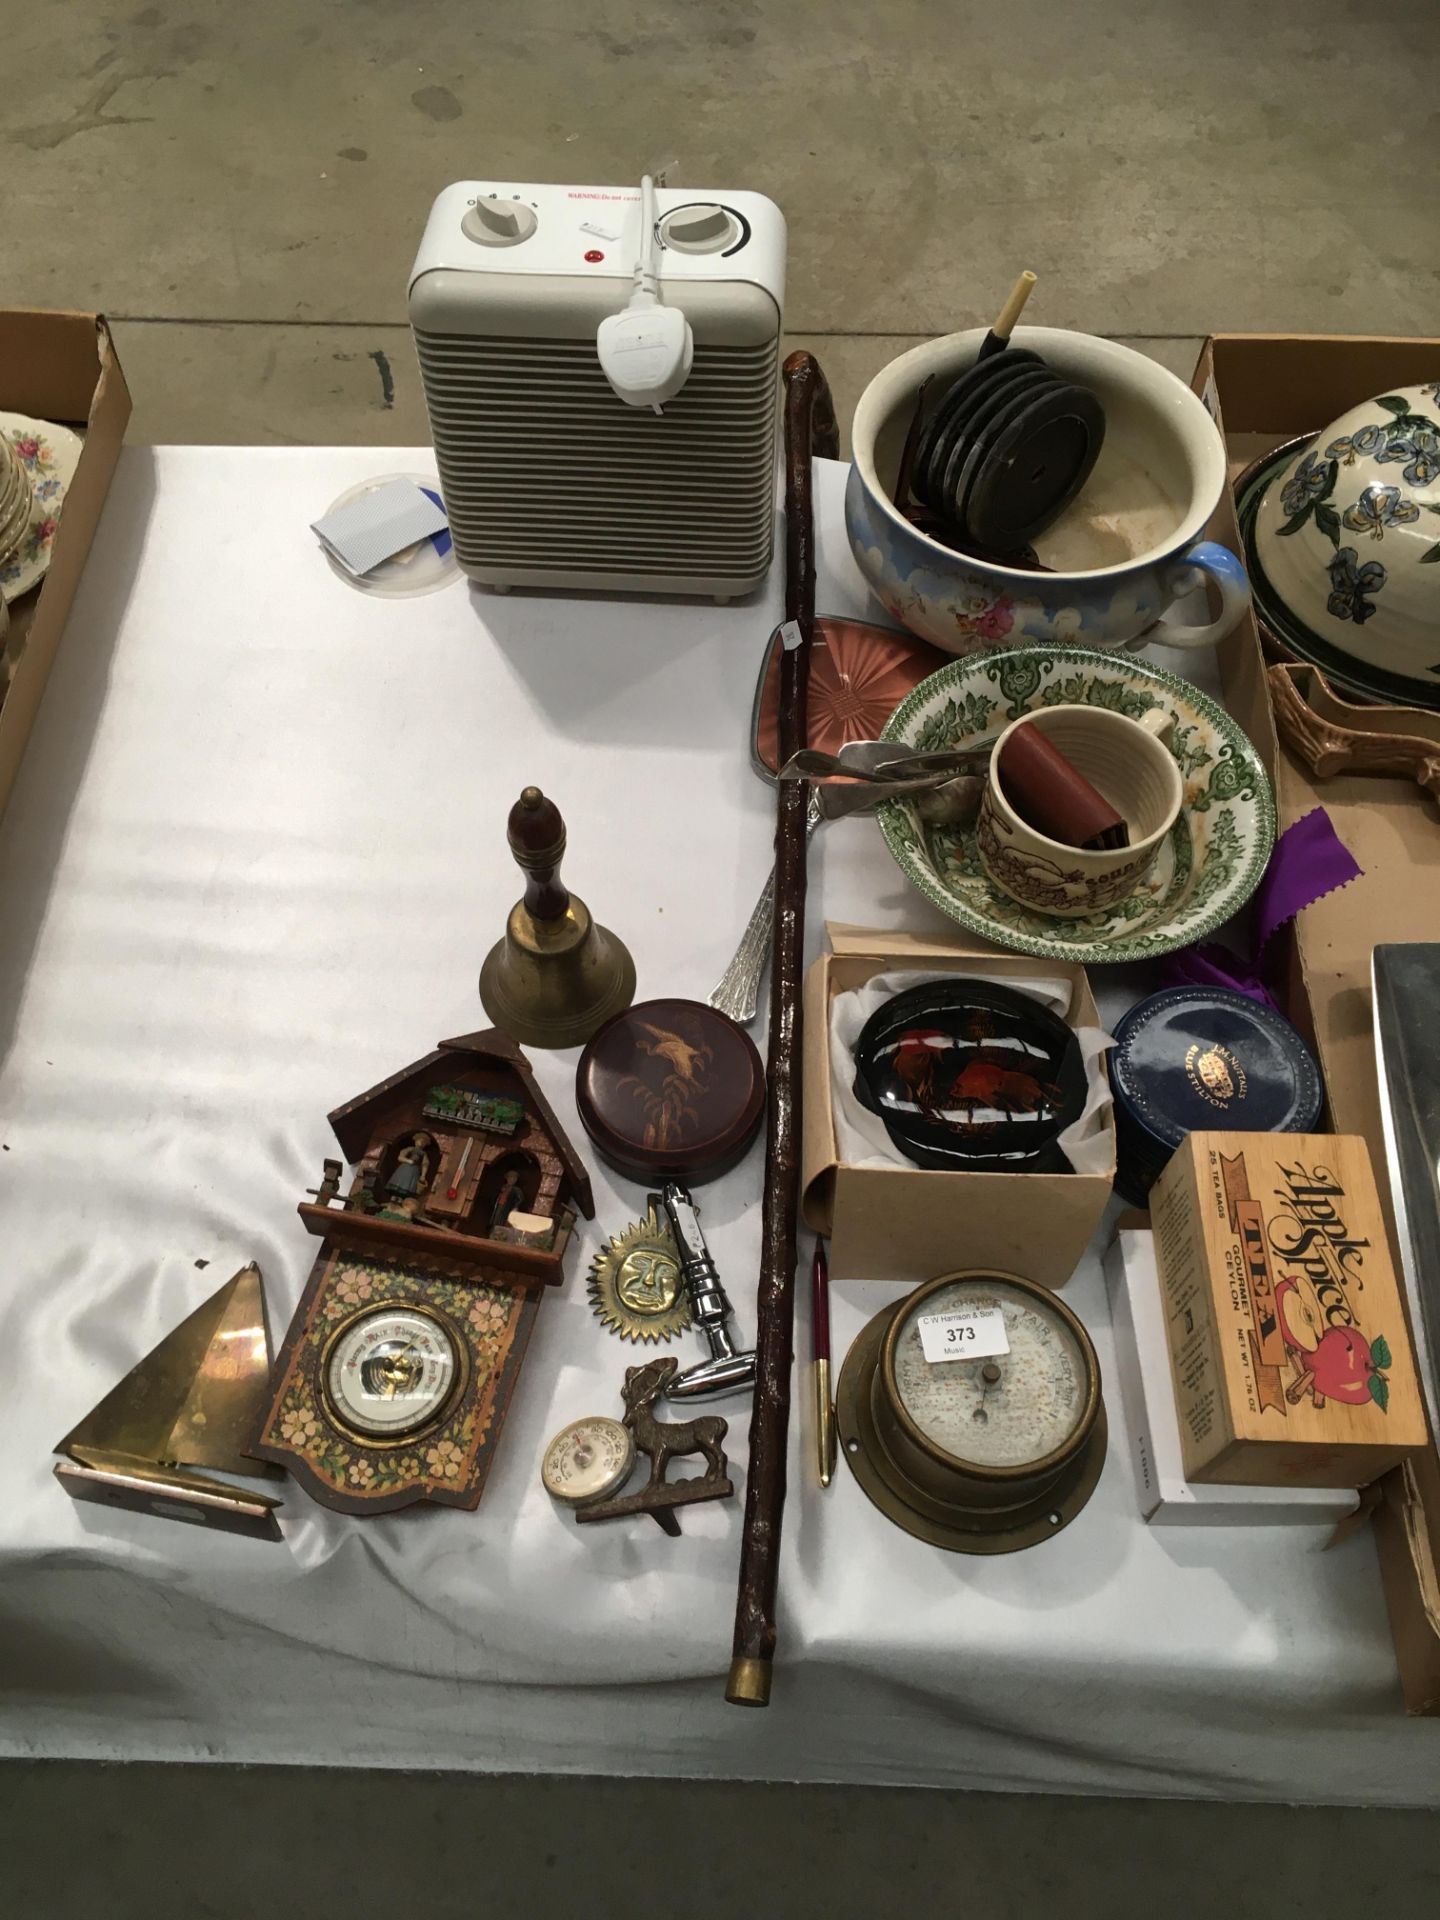 Contents to part table top - small fan heater, brass wall barometer, a floral patterned gazunder,